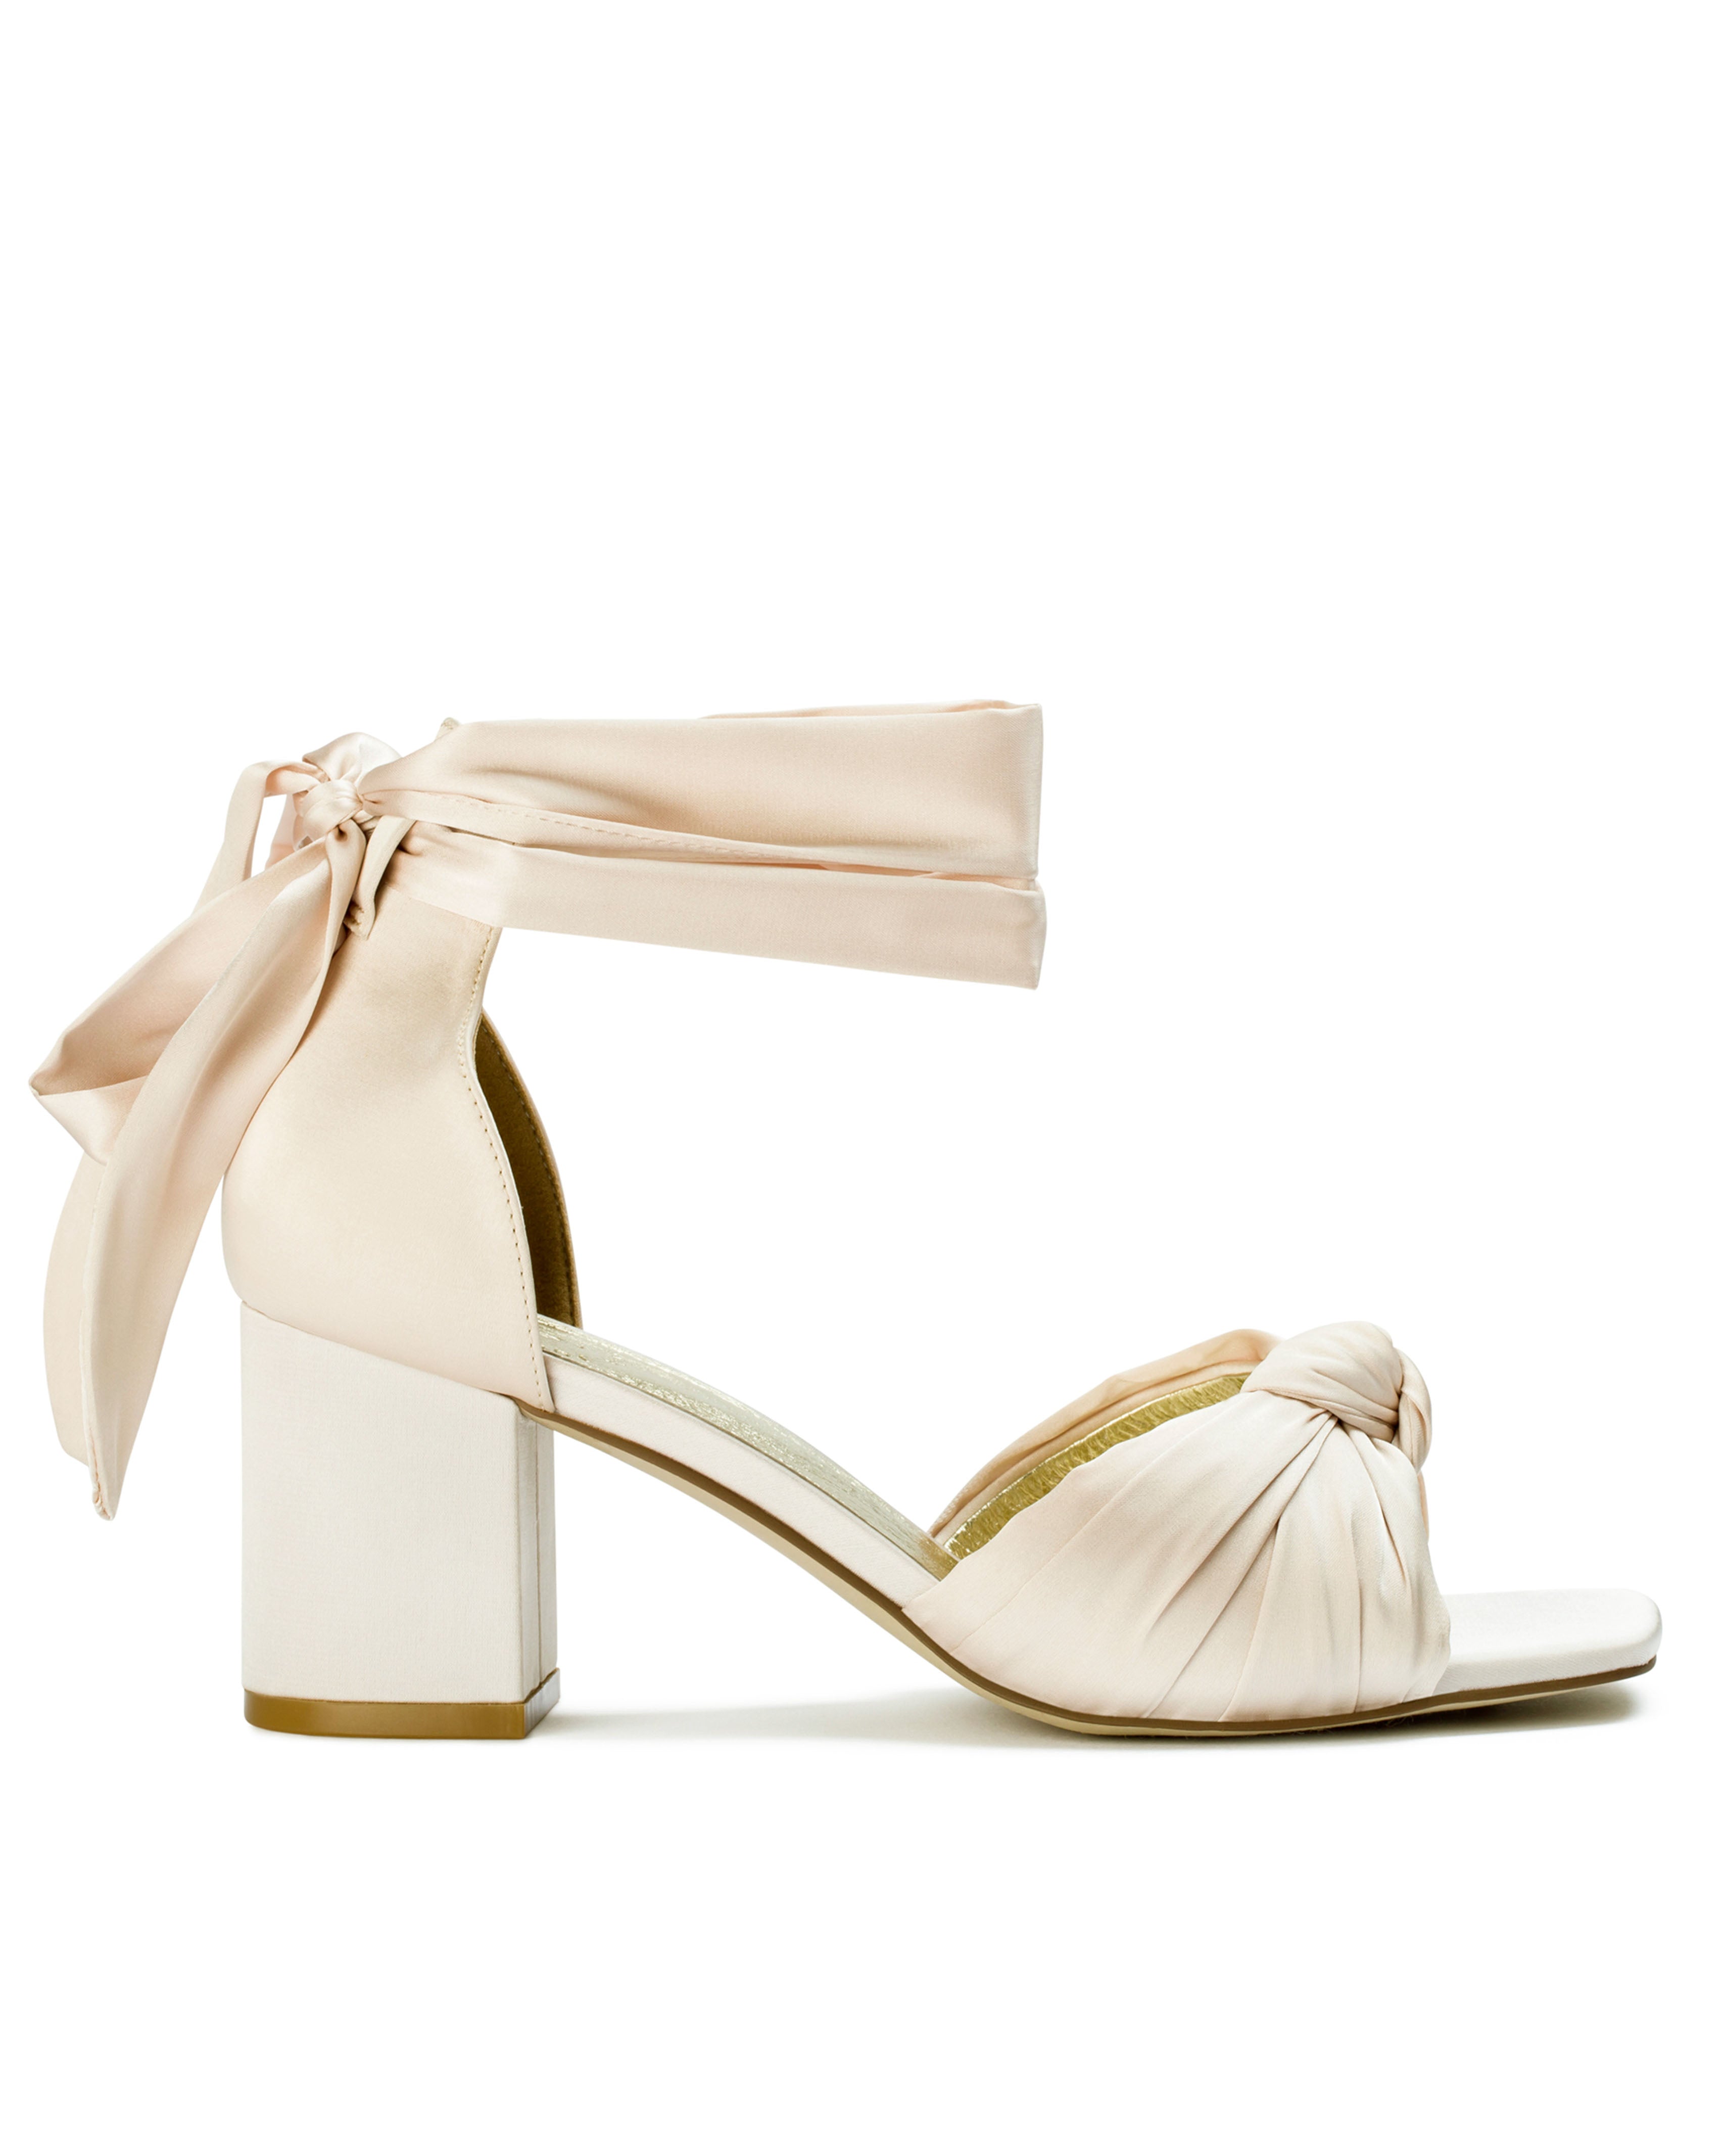 Nude bridal Shoes with low heel in beige satin for your wedding day